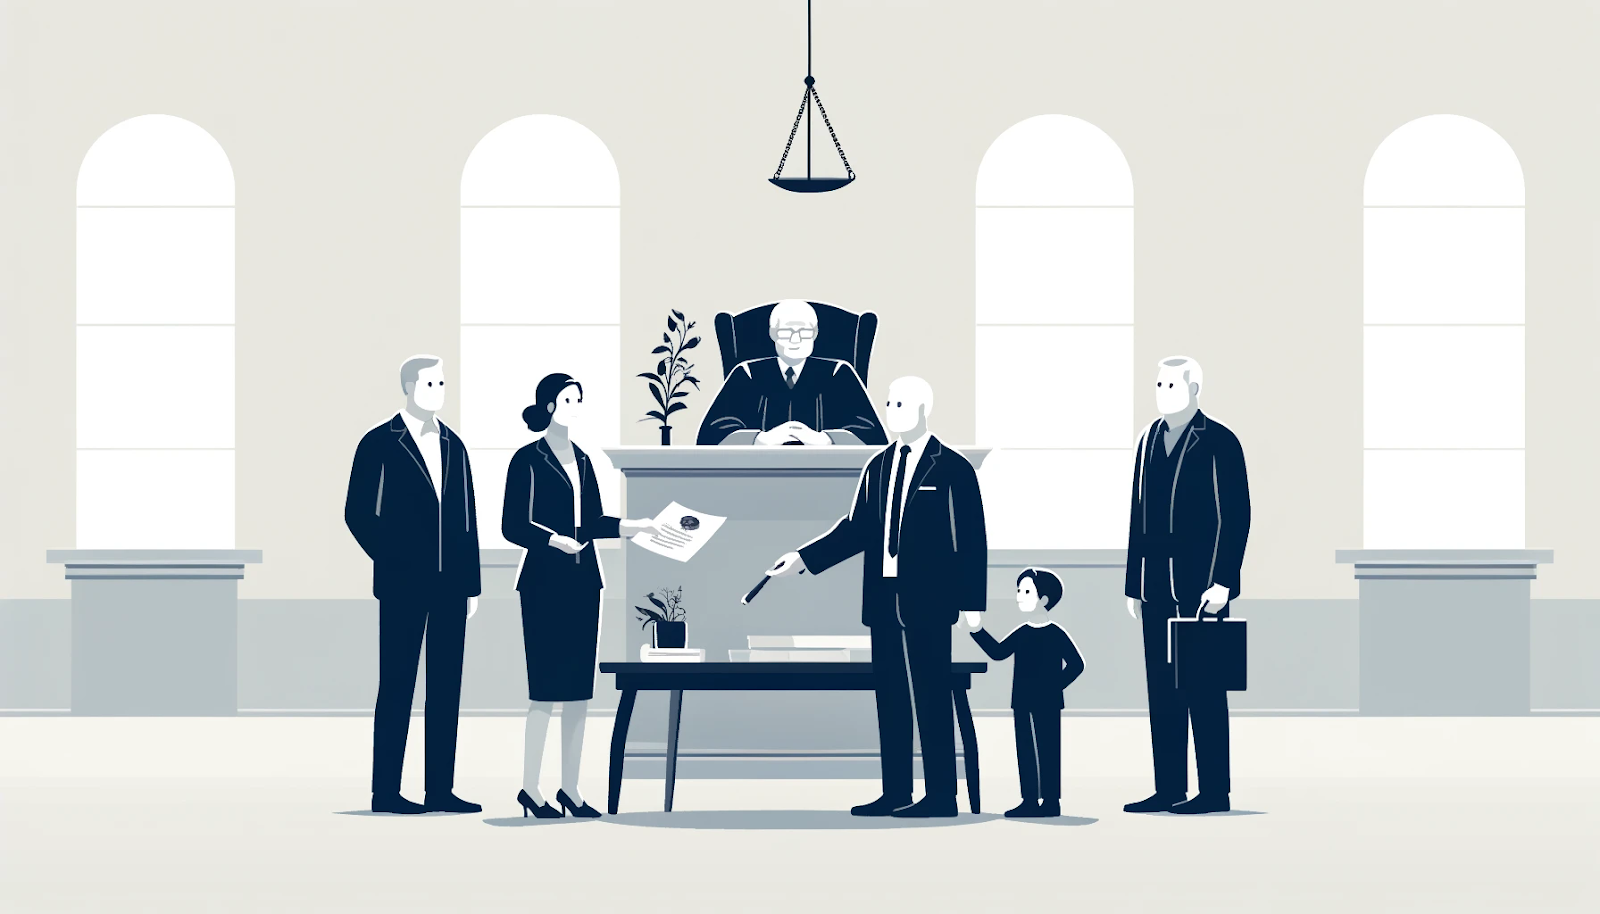 A bequest in a will specifies who inherits property after your death.